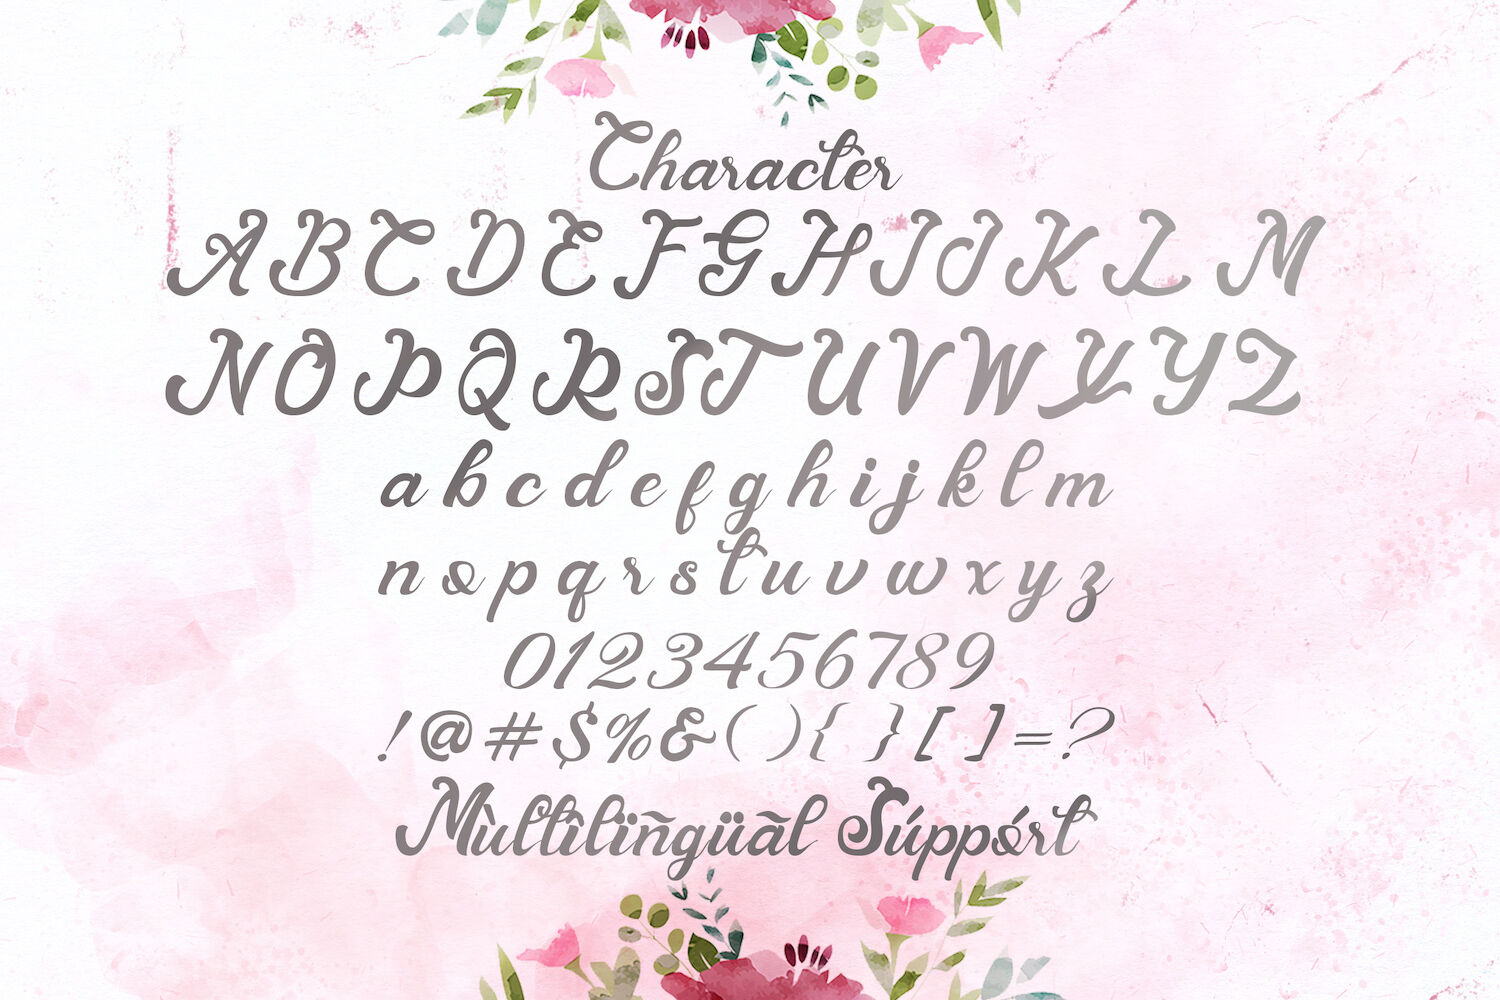 Andy Tusvah Bold Script Font By Stringlabs Thehungryjpeg Com